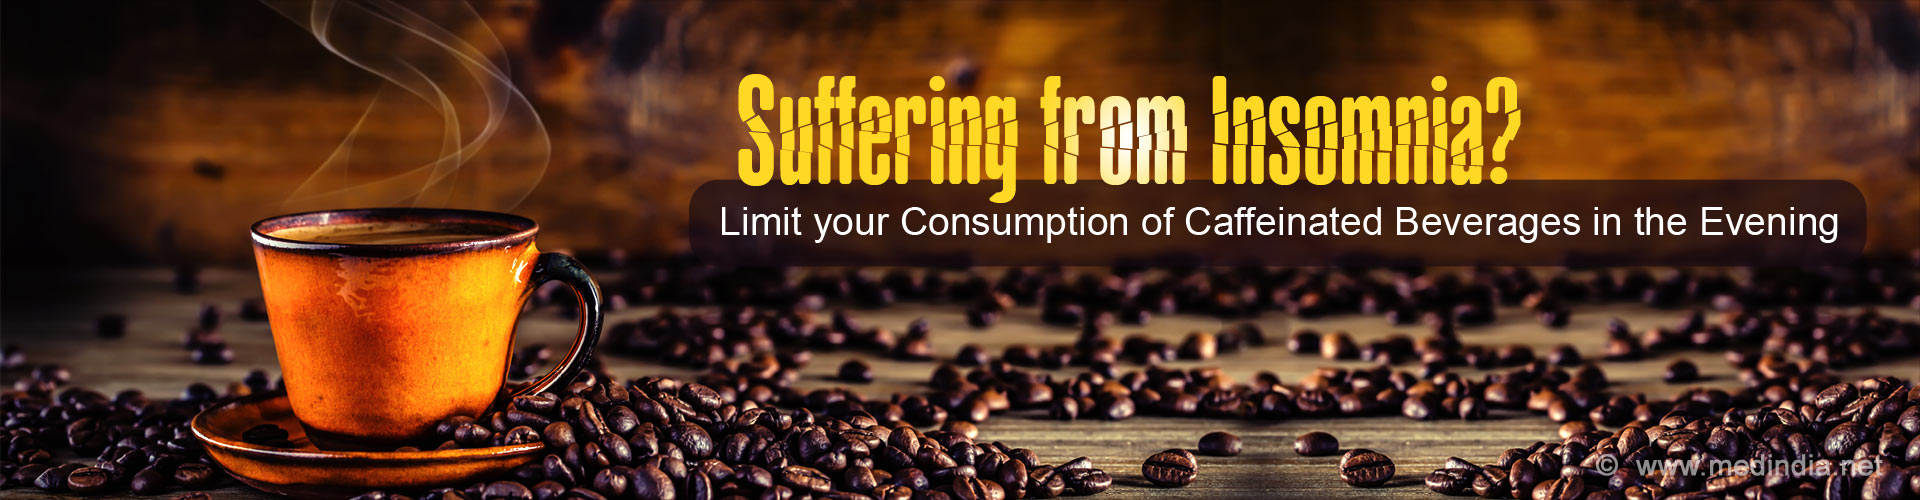 Suffering from Insomnia? Limit your Consumption of Caffeinated Beverages in the Evening